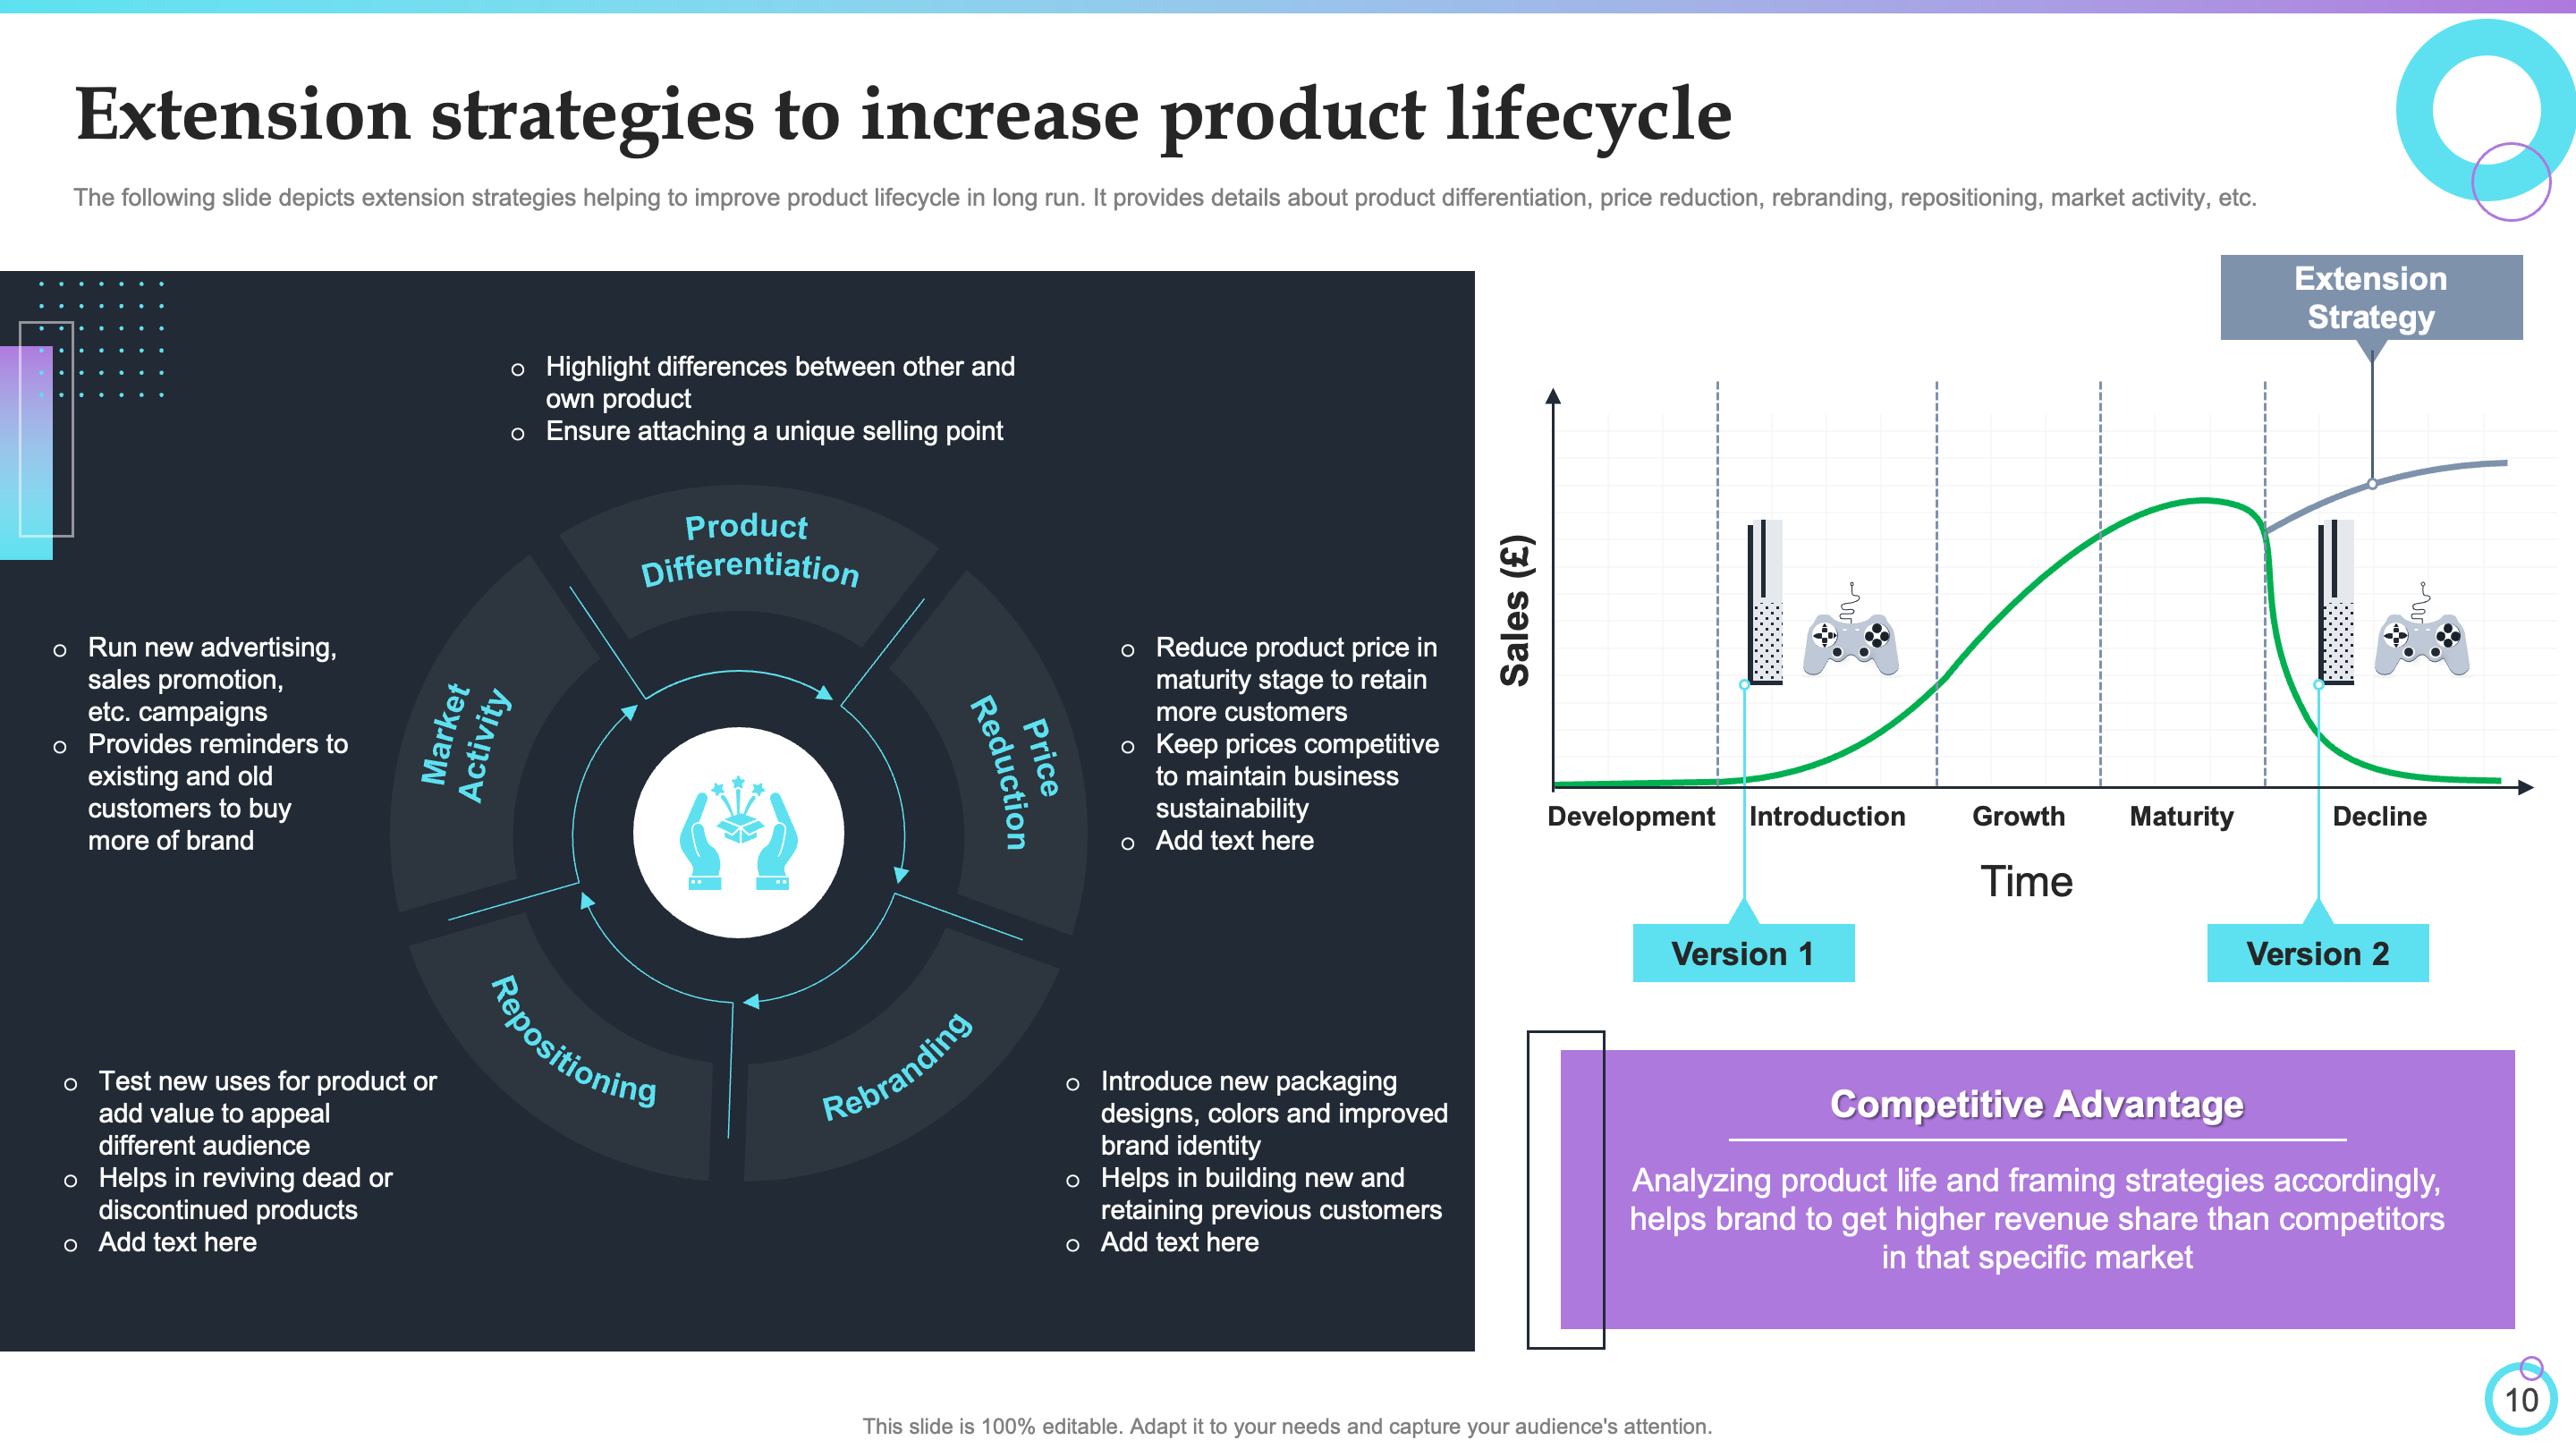 Extension Strategies to Increase Product Lifecycle